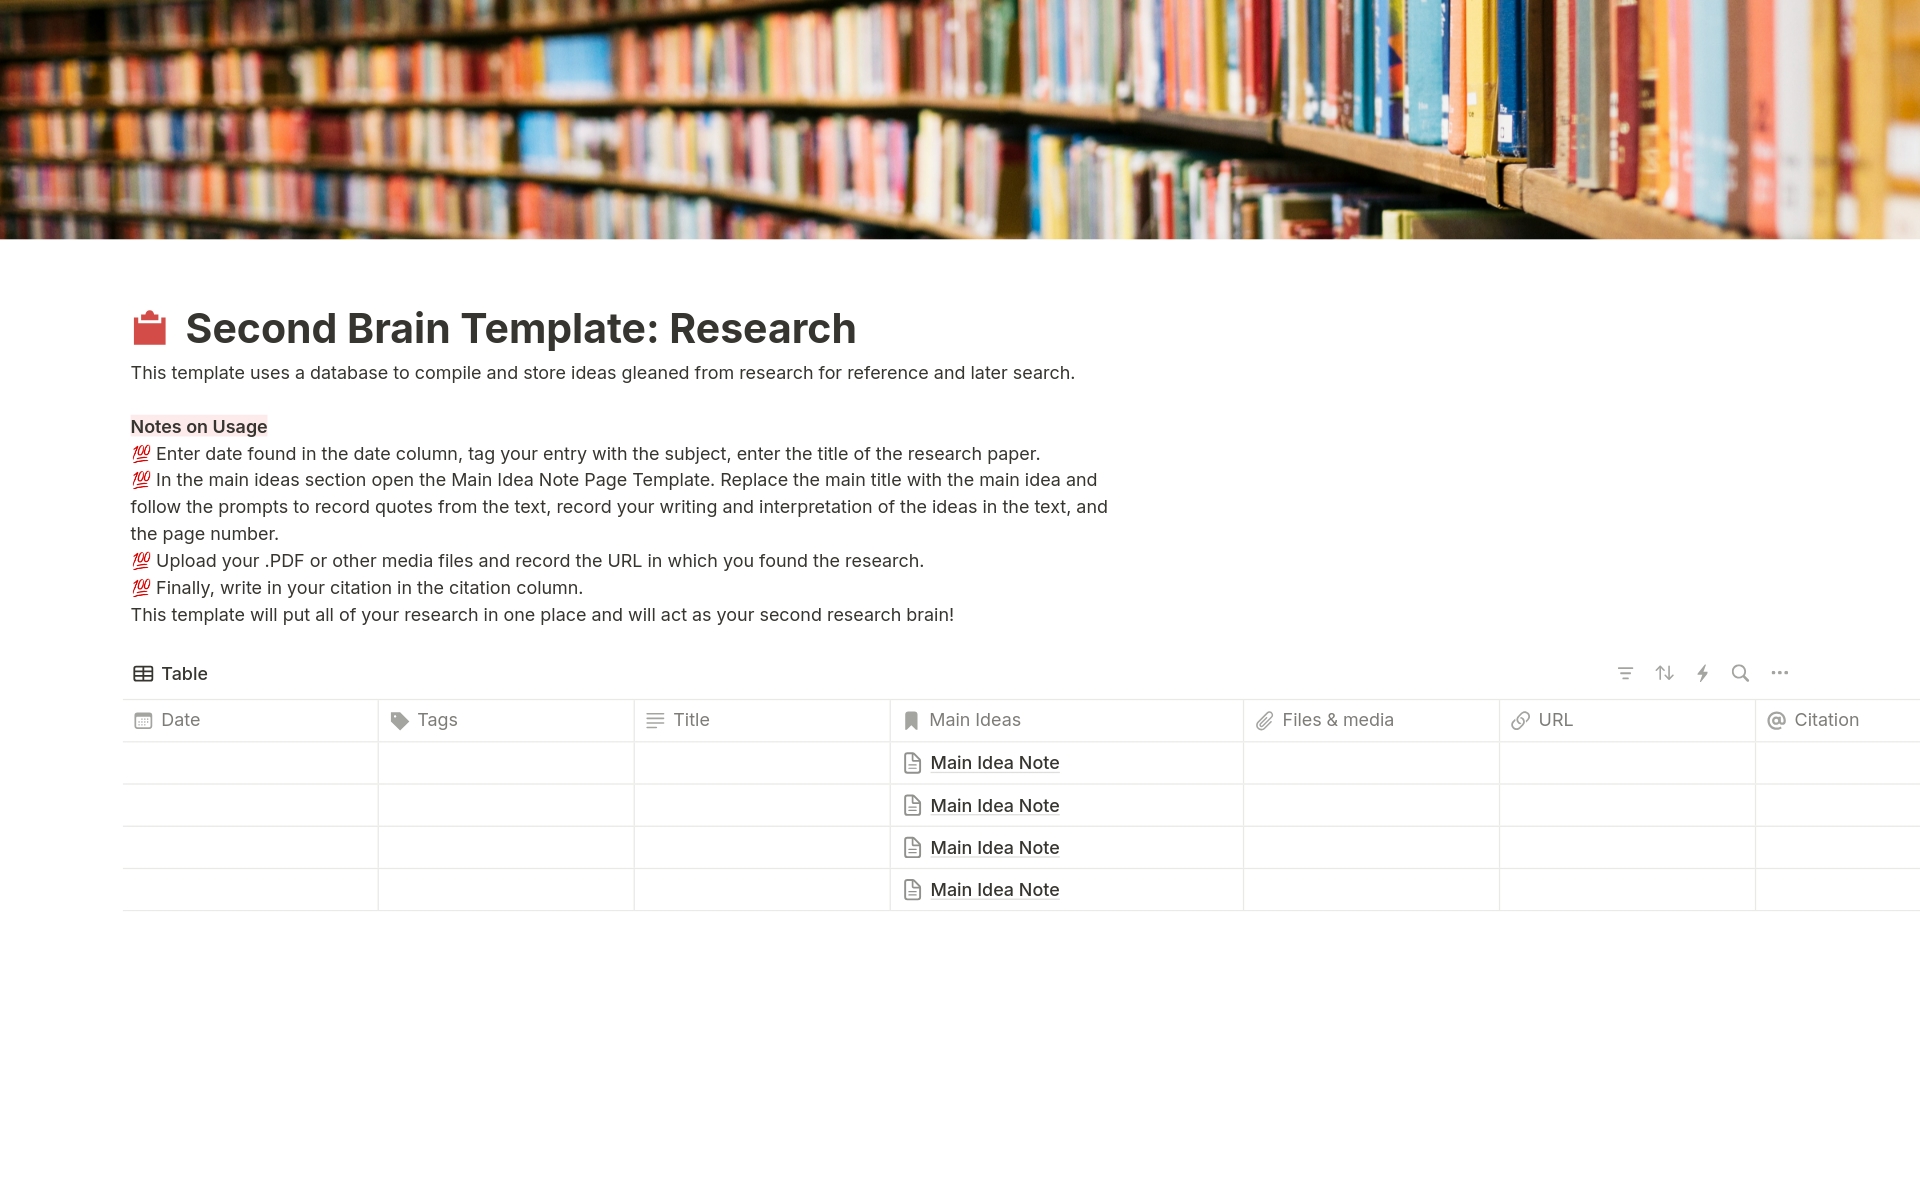 This template has everything you need to document all of your thesis or dissertation research in one place.